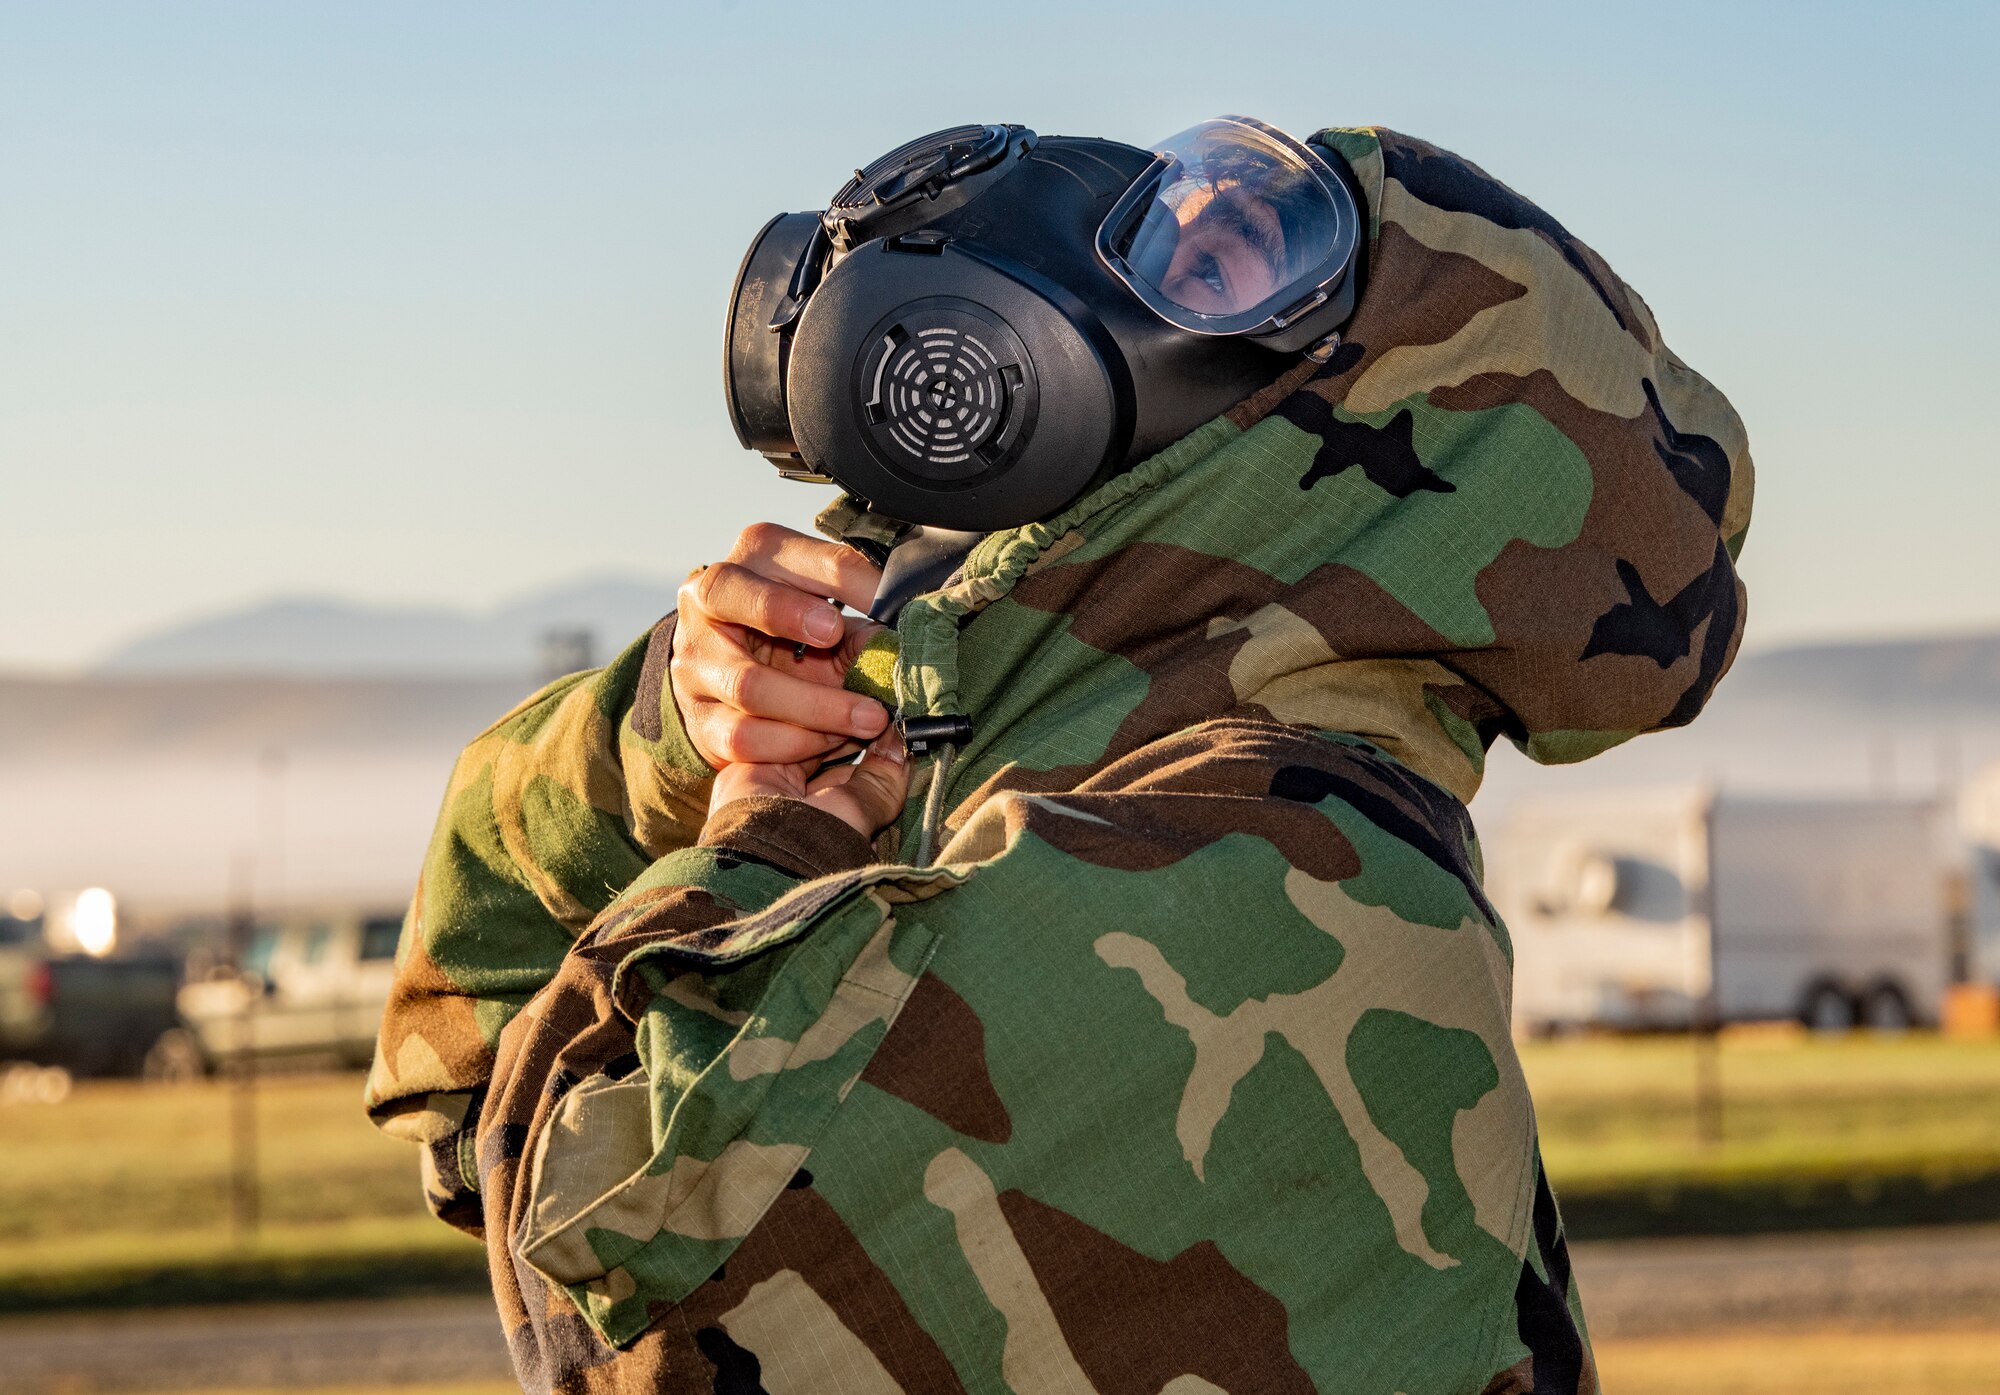 Master Sgt. Jannett Orozco, 60th Operational Medical Readiness Squadron warrior medical flight chief, dons her Mission Oriented Protective Posture equipment during a training exercise on Oct. 28 2021, at Travis Air Force Base, California. The scenario required Airmen to properly don their gear during a chemical, biological, radiological, nuclear attack scenario. (U.S. Air Force photo by Heide Couch)